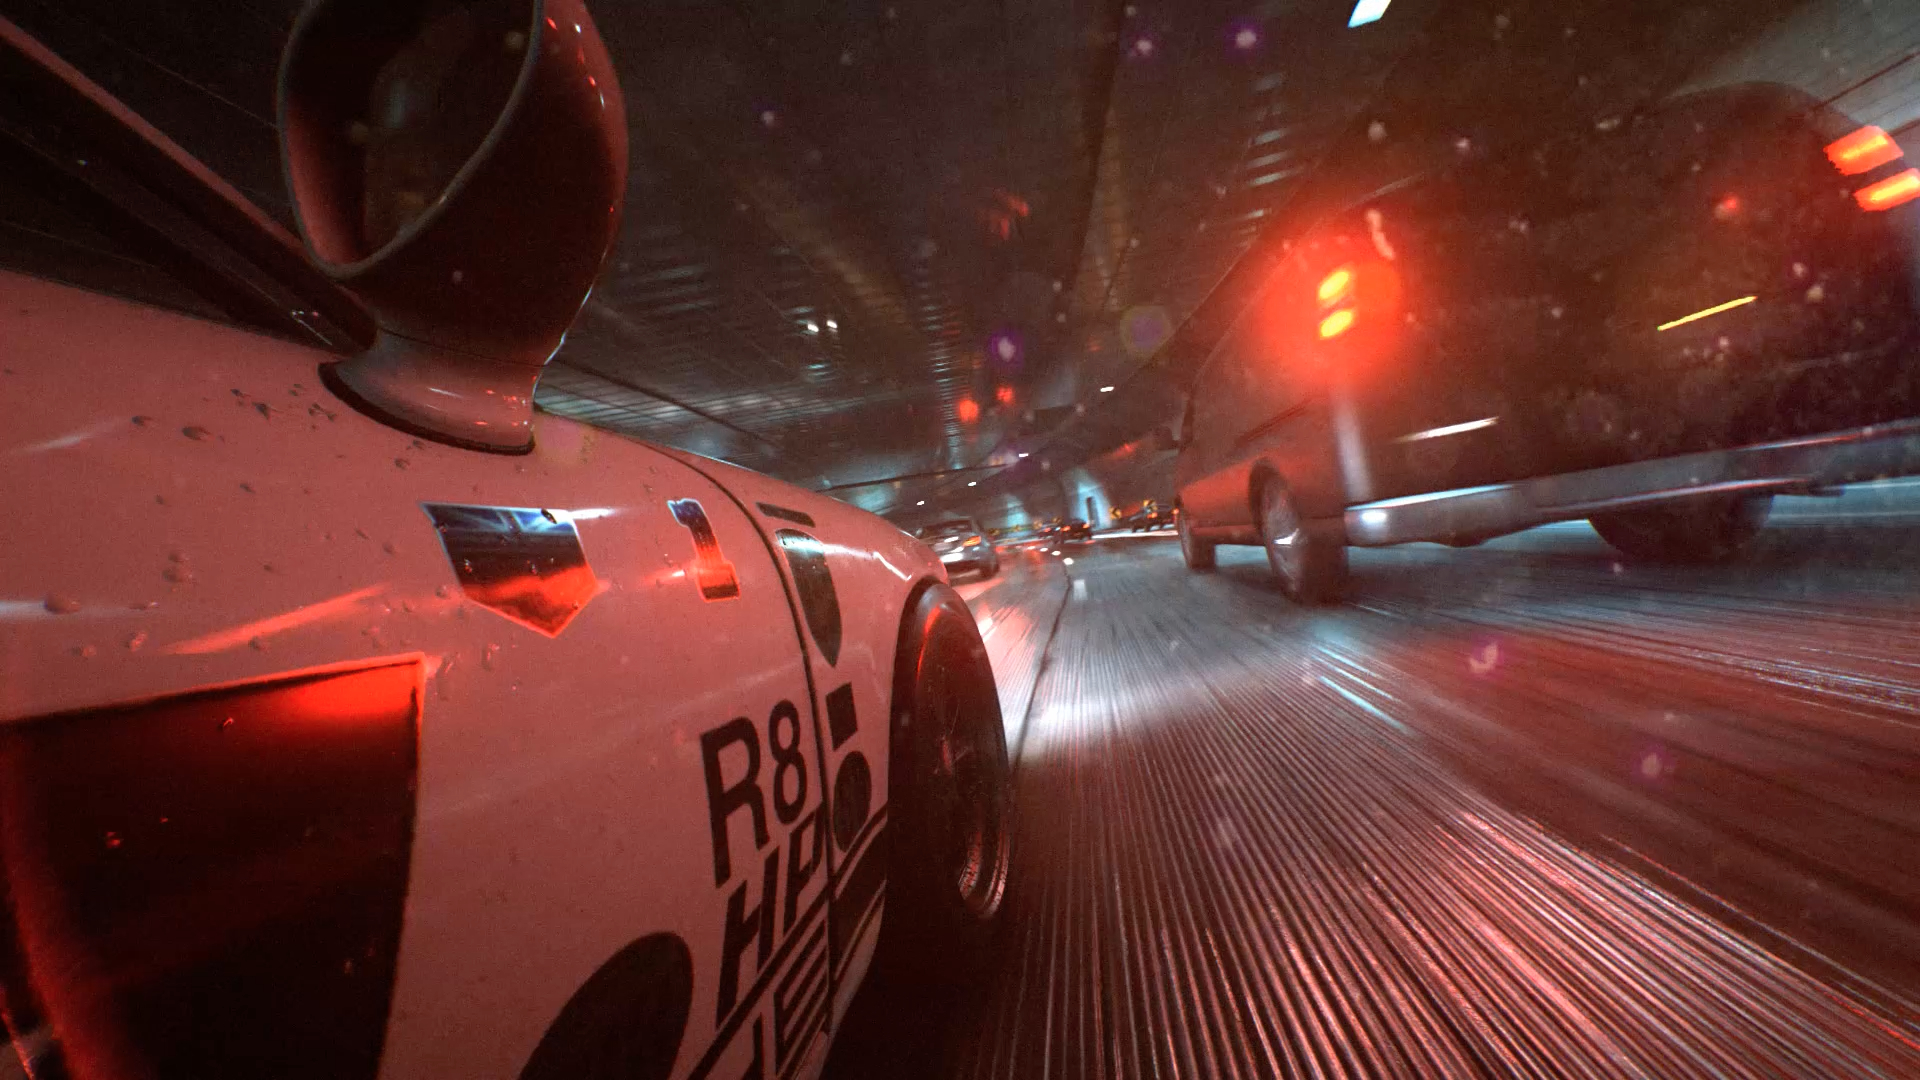 Video Game Need For Speed 2015 1920x1080